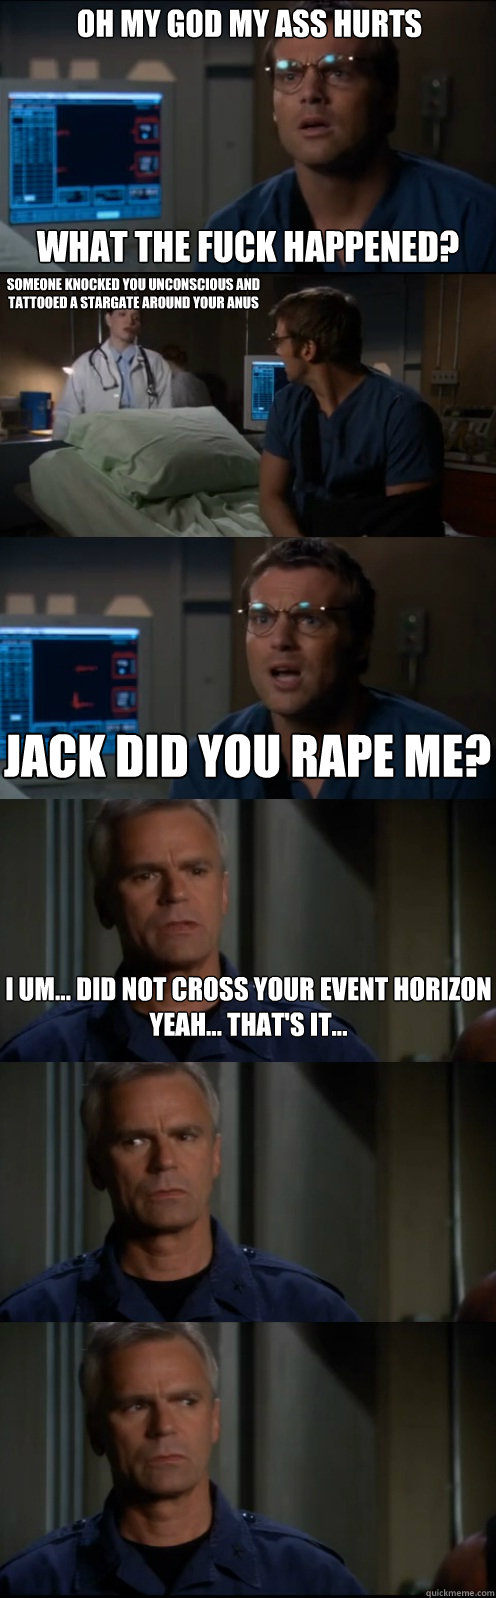 Oh my God My ass hurts What the fuck happened? Someone knocked you unconscious and tattooed a stargate around your anus  Jack did you rape me? I um... did not cross your event horizon
Yeah... that's it...  